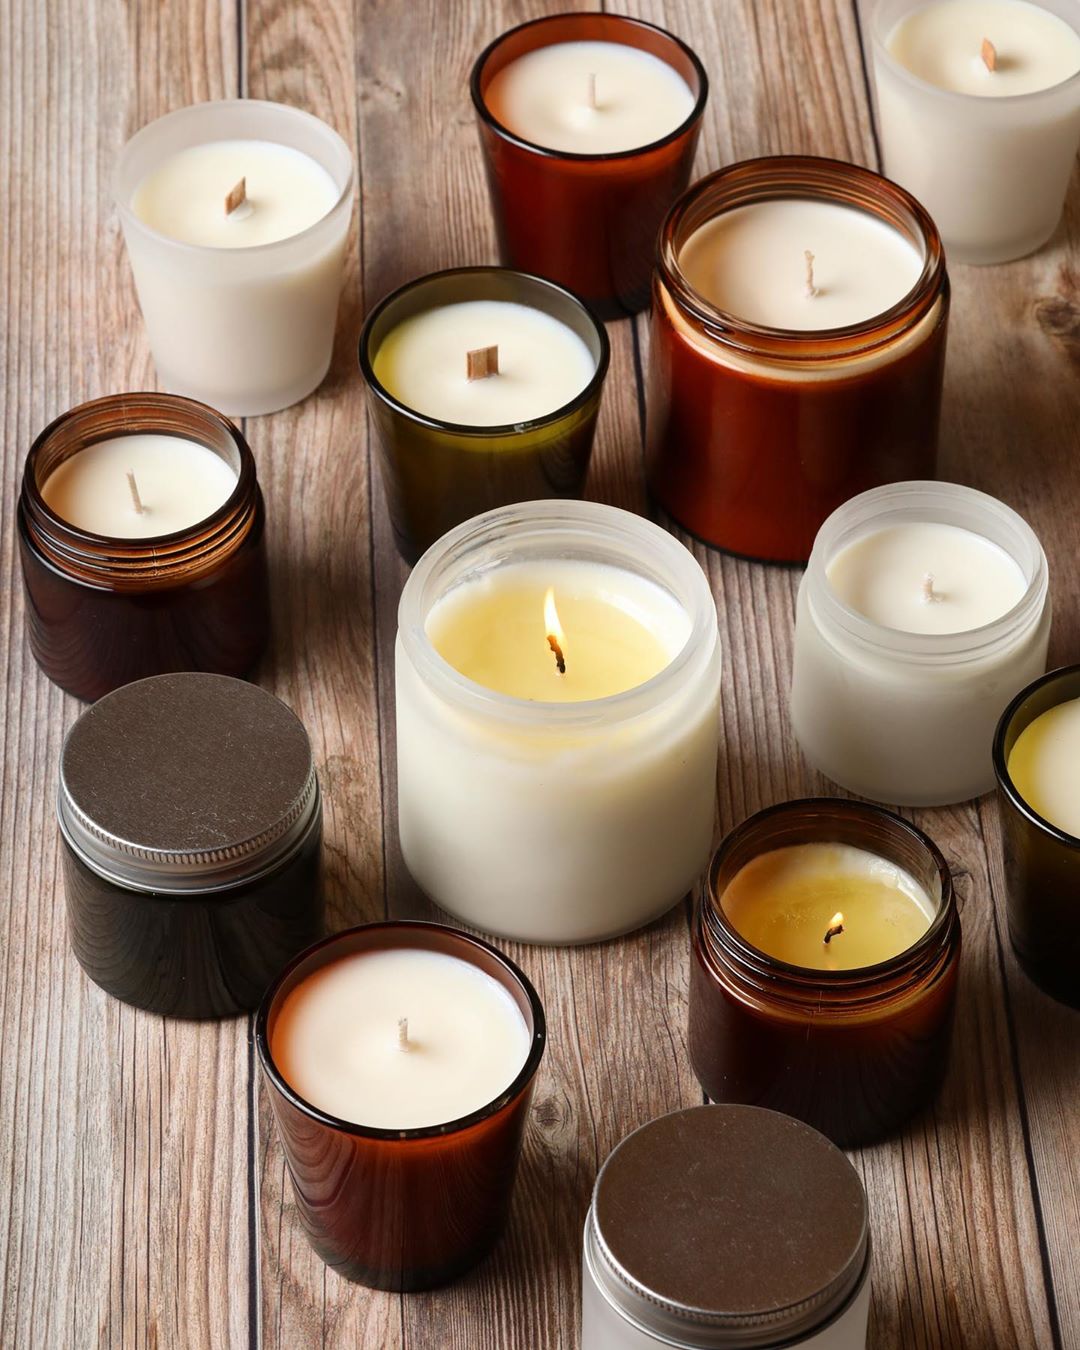 Candle Scents for Candle Making - Search Shopping